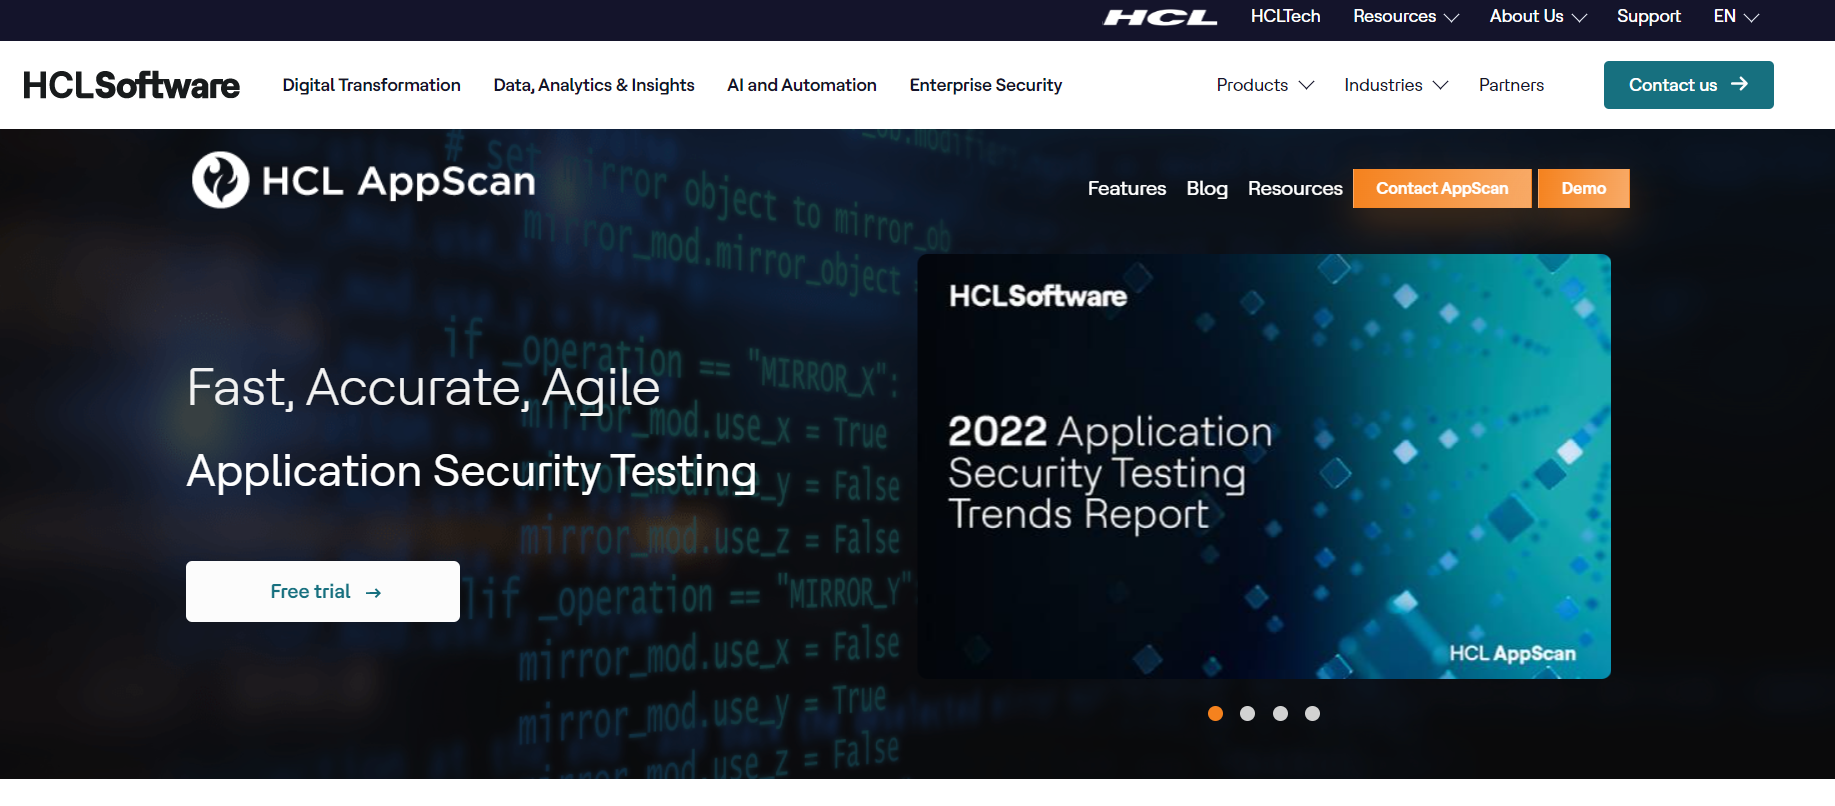 HCL appscan